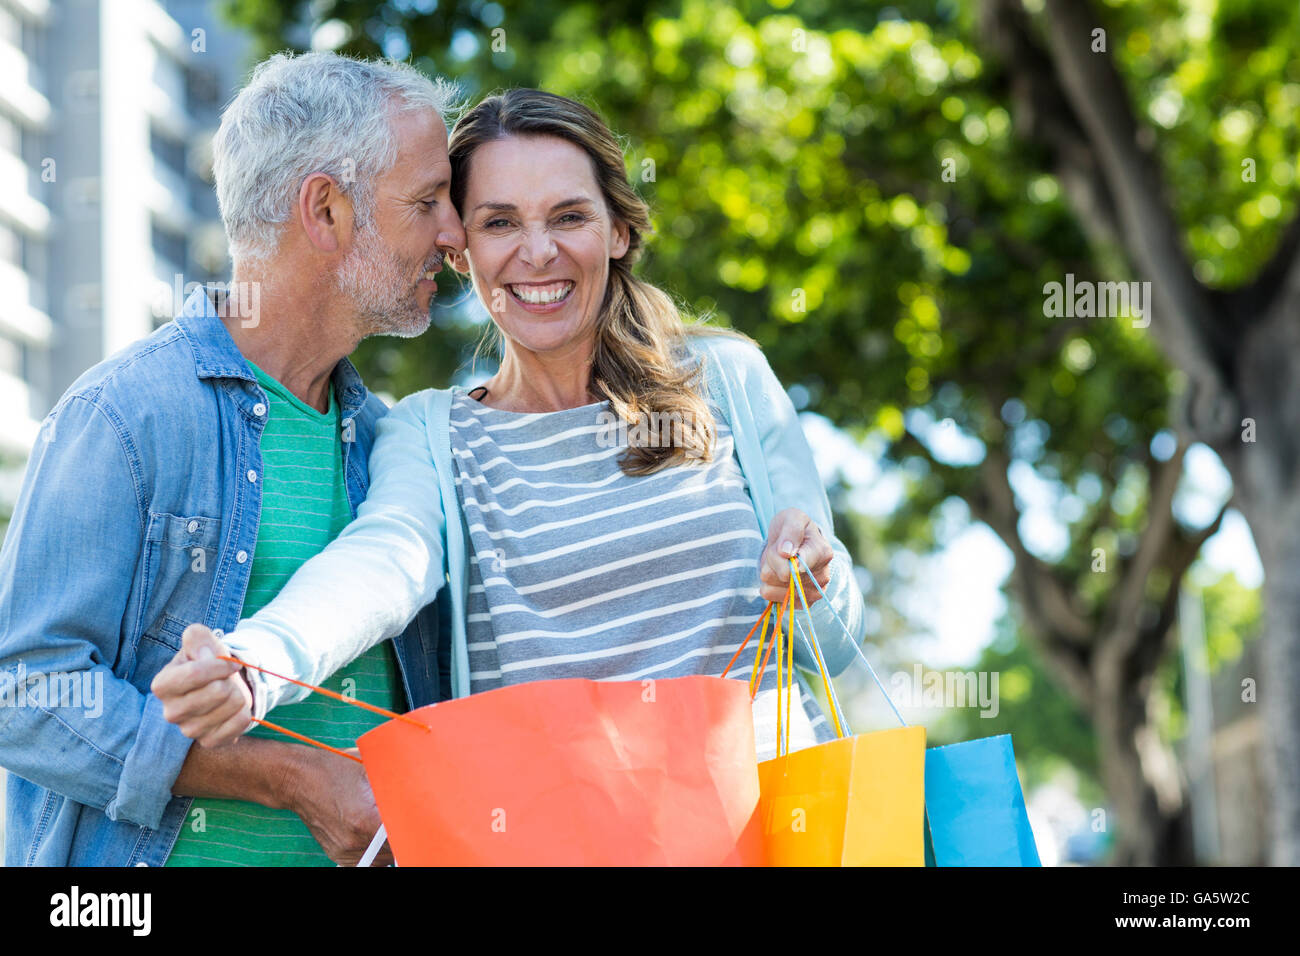 Romantic couple carrying shopping bags in city Banque D'Images